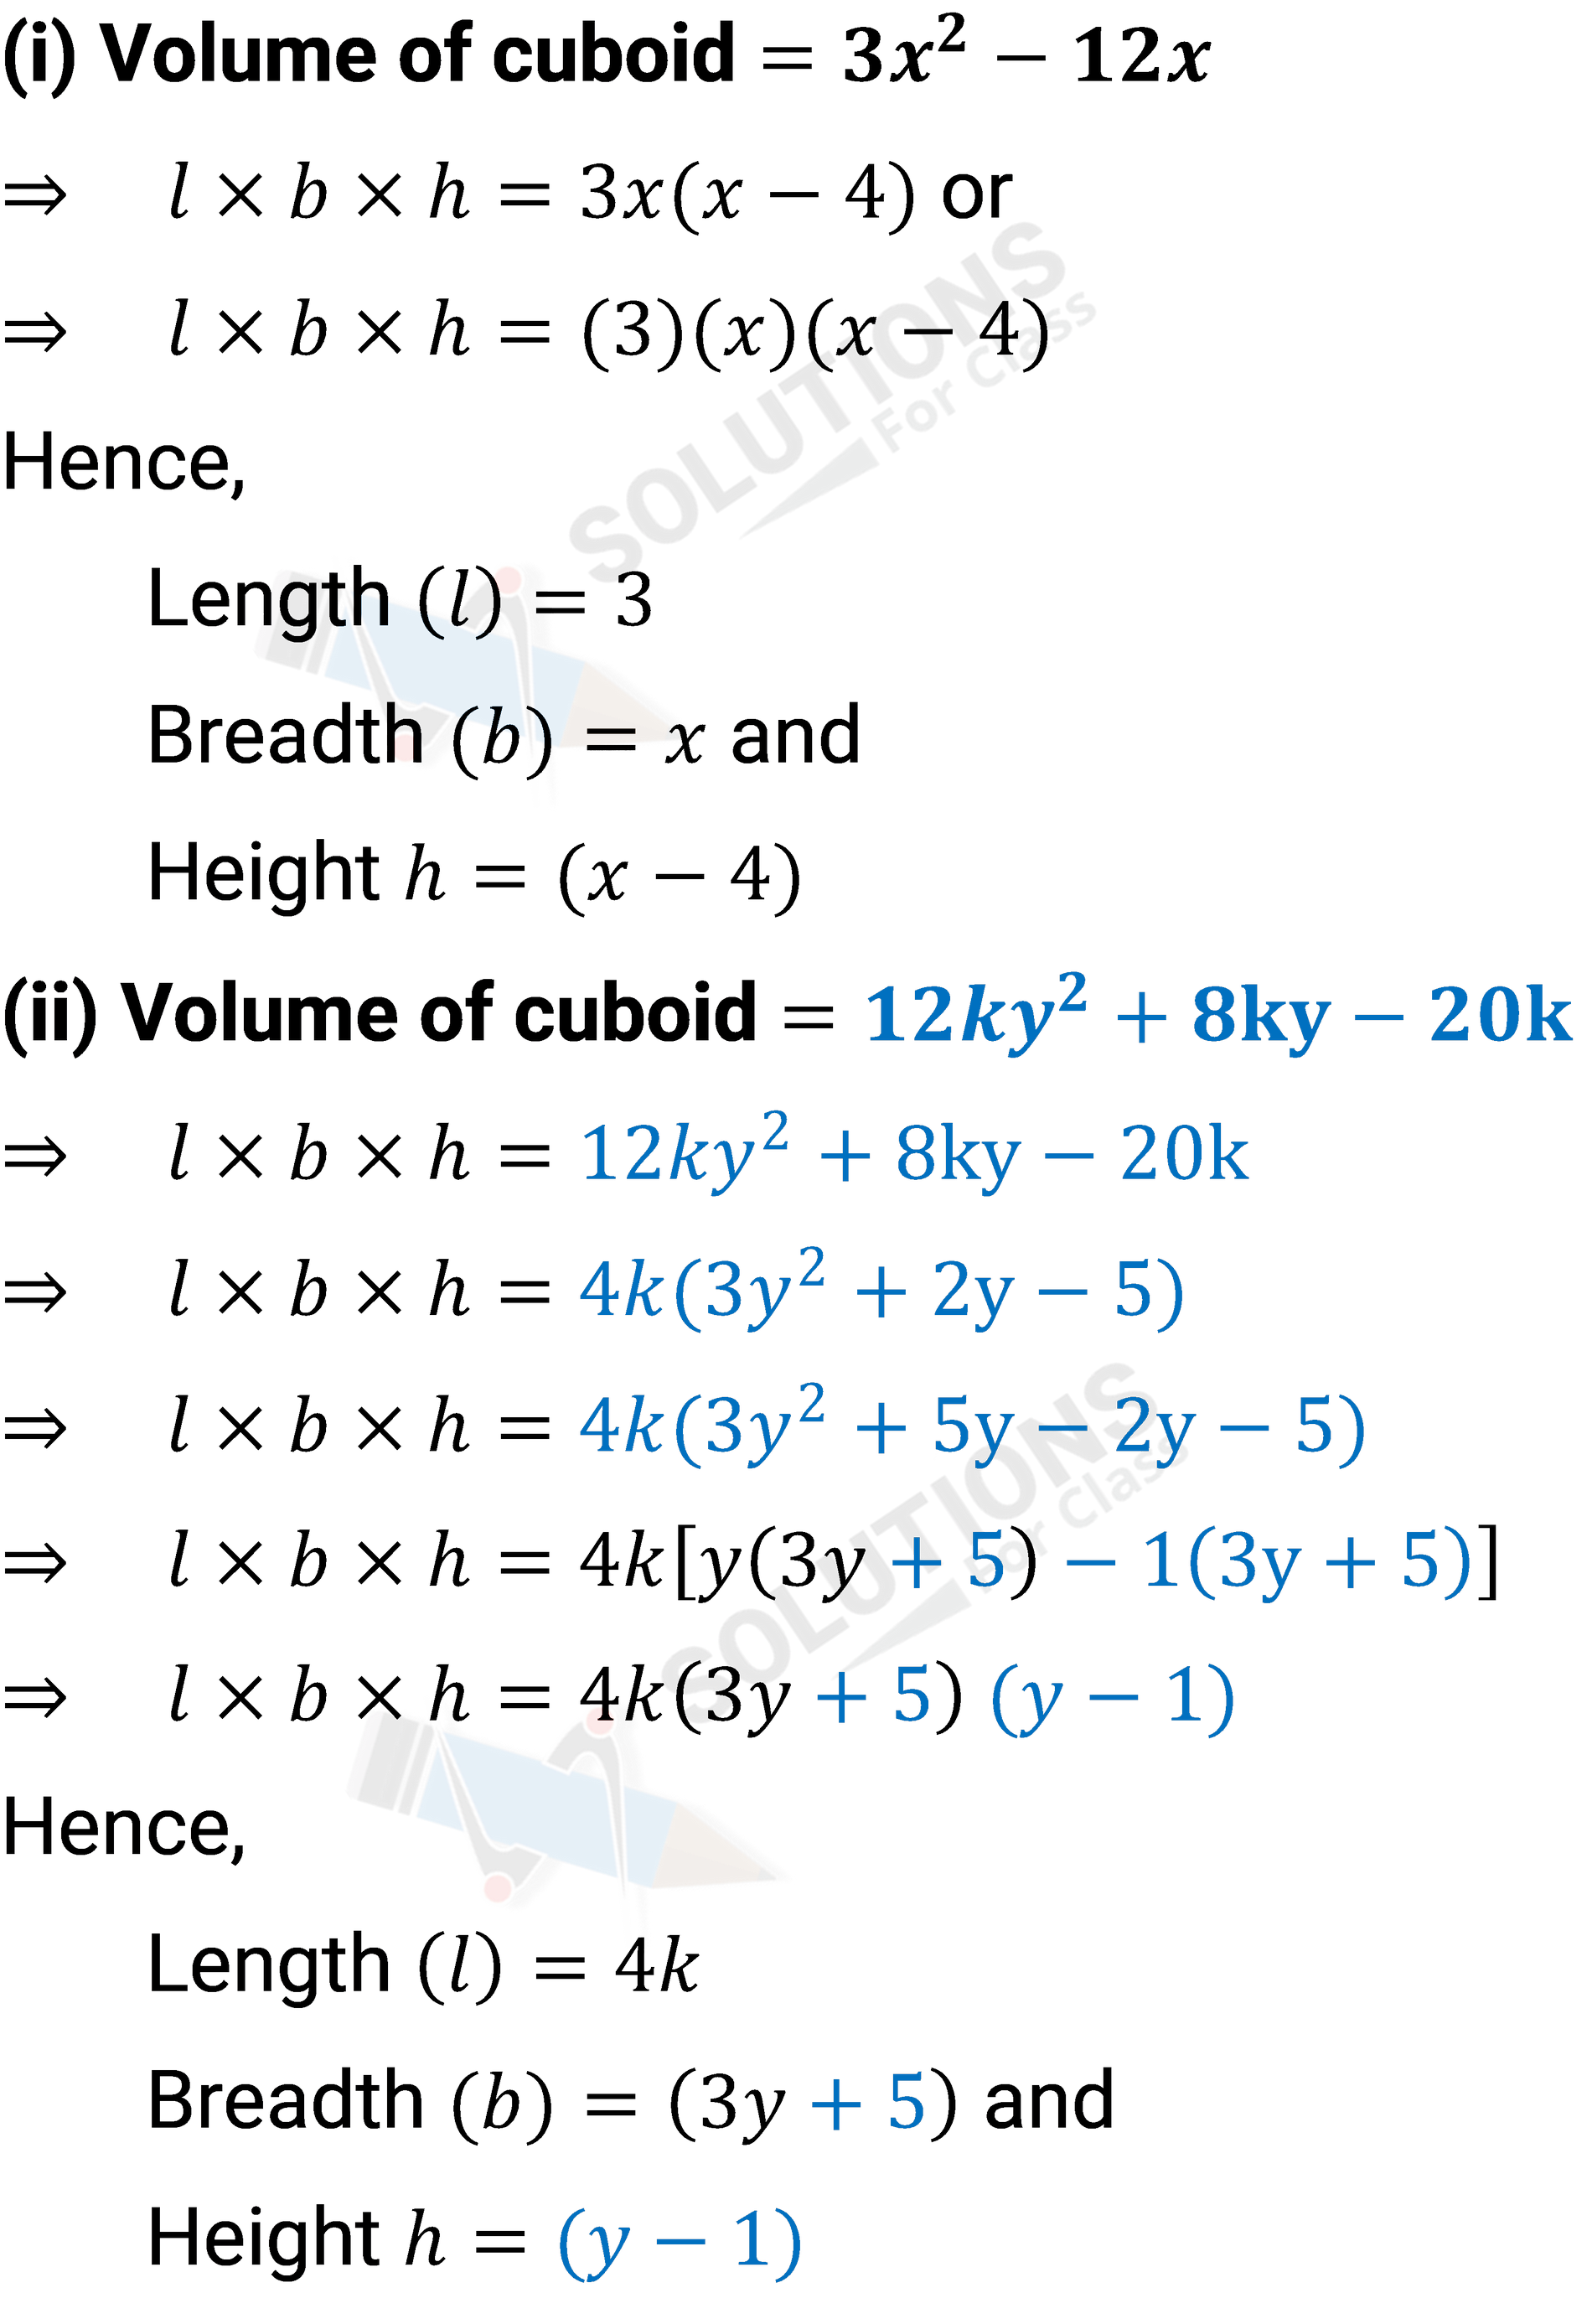 NCERT Solution For Class 9, Maths, Chapter 2, Polynomials, Exercise 2.5, Q.16